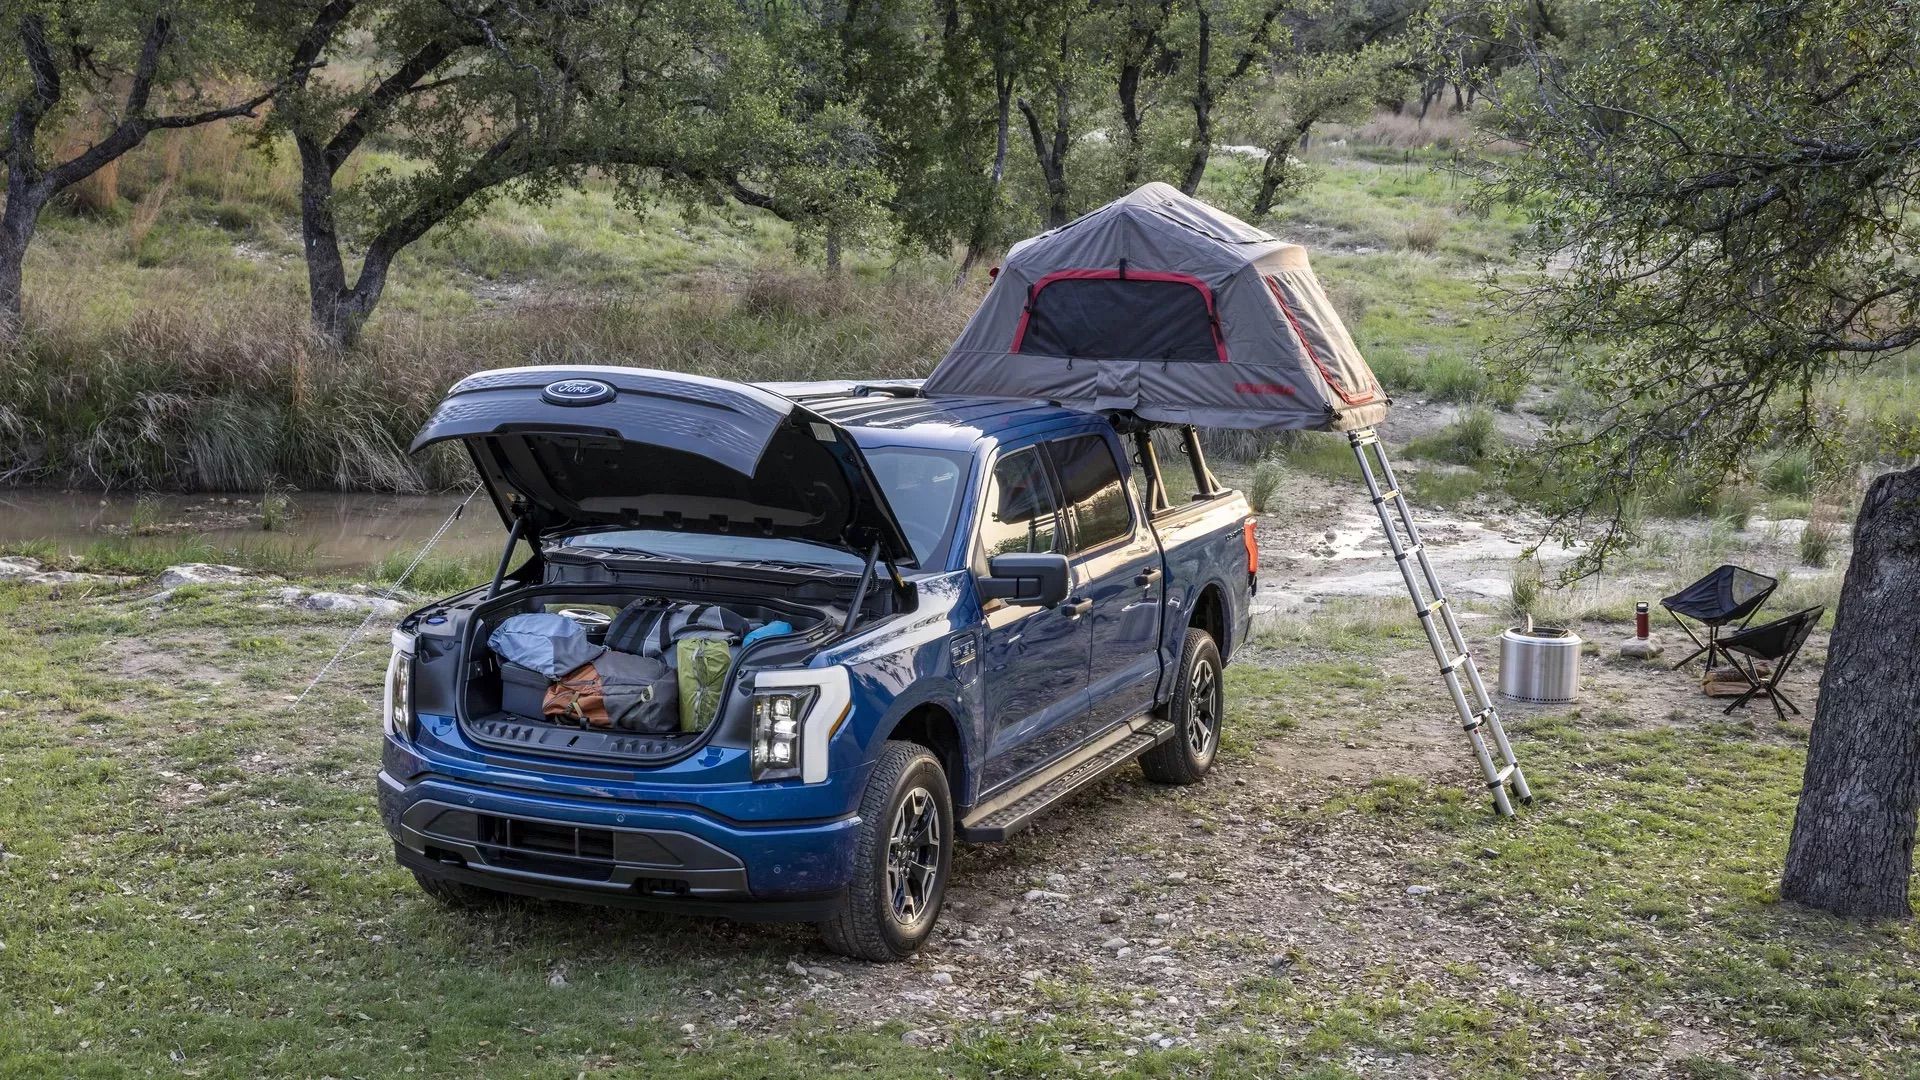 Ford's F-150 Lightning's frunk stores gear in a secure, dry place